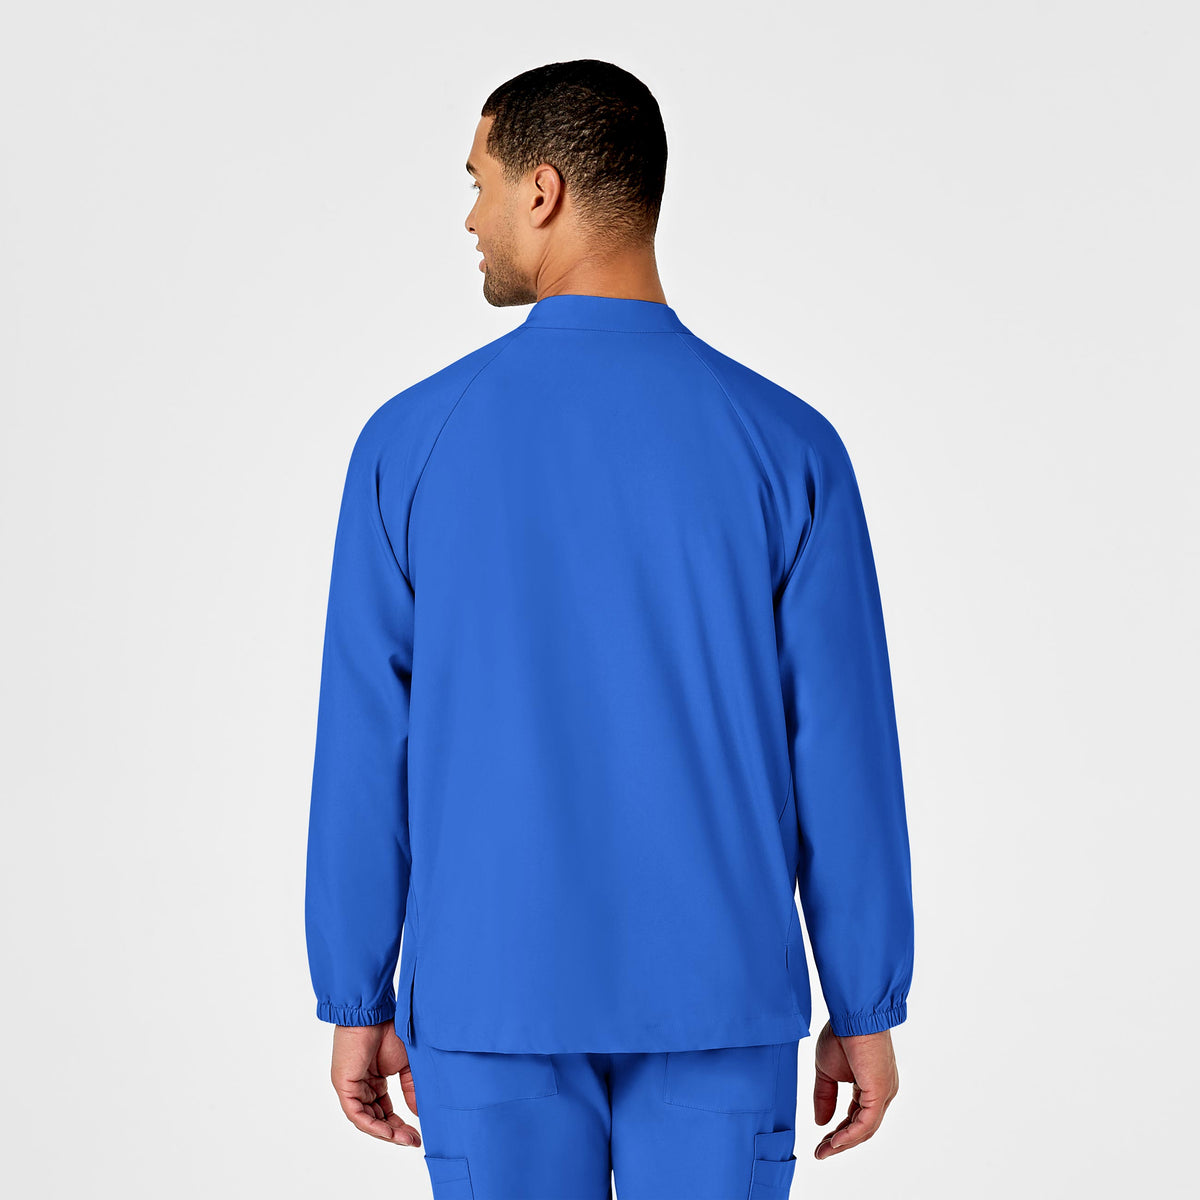 W123 Men's Zip Front Warm Up Jacket Royal back view